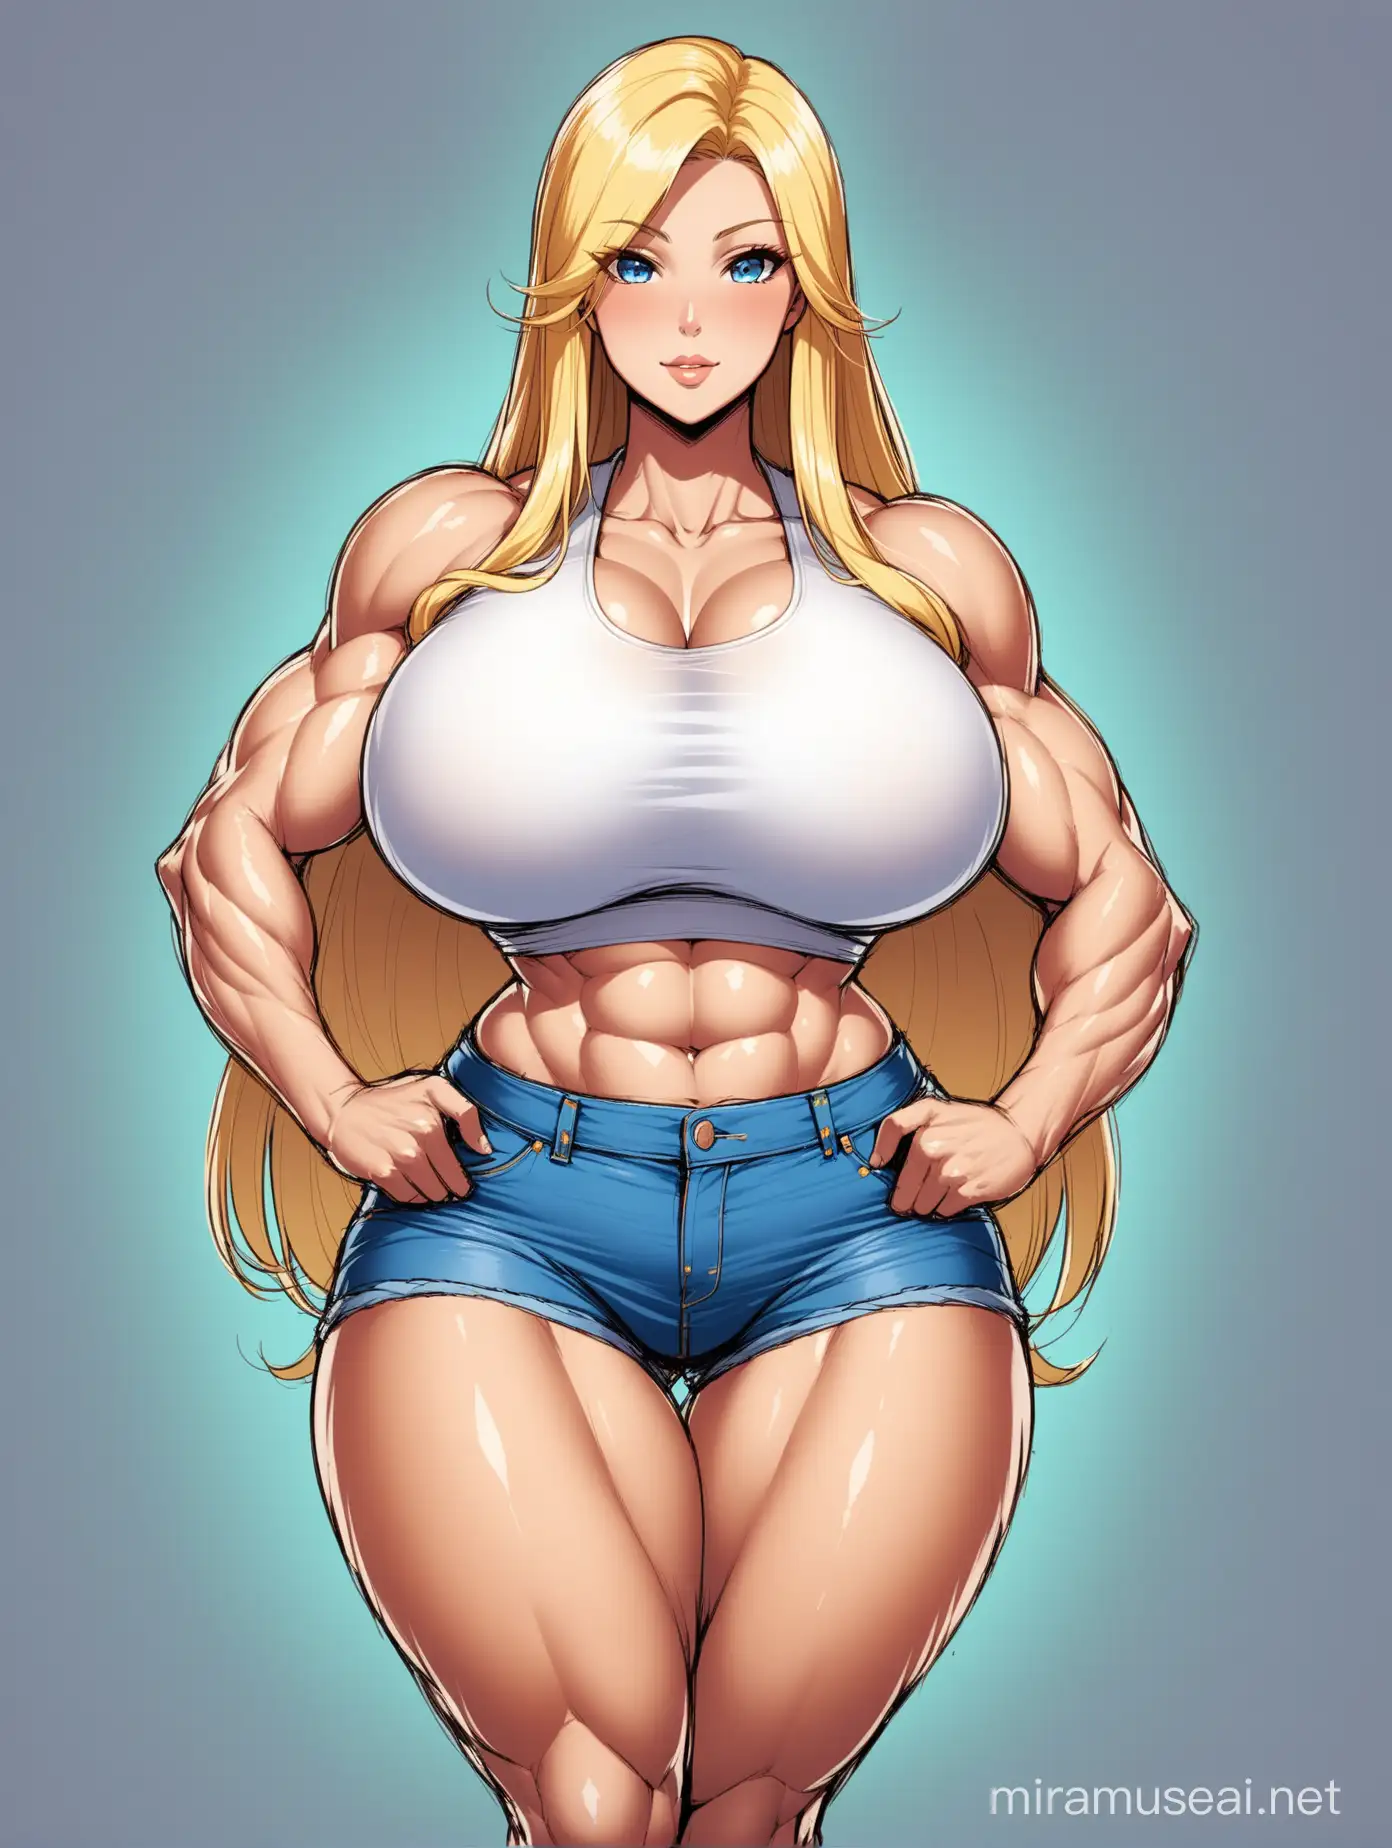 Full color drawing of a blond woman with a beautiful, delicate face, huge chest, extremely large chest, enormous chest, colossal chest, very thin waist, extremely thin waist, wide hips, strong legs, huge legs, very wide and muscular legs, making a sexy pose, showing off her beautiful body, wearing casual clothing, including a top and jean shorts. Emphasize her immense chest, her massive chest